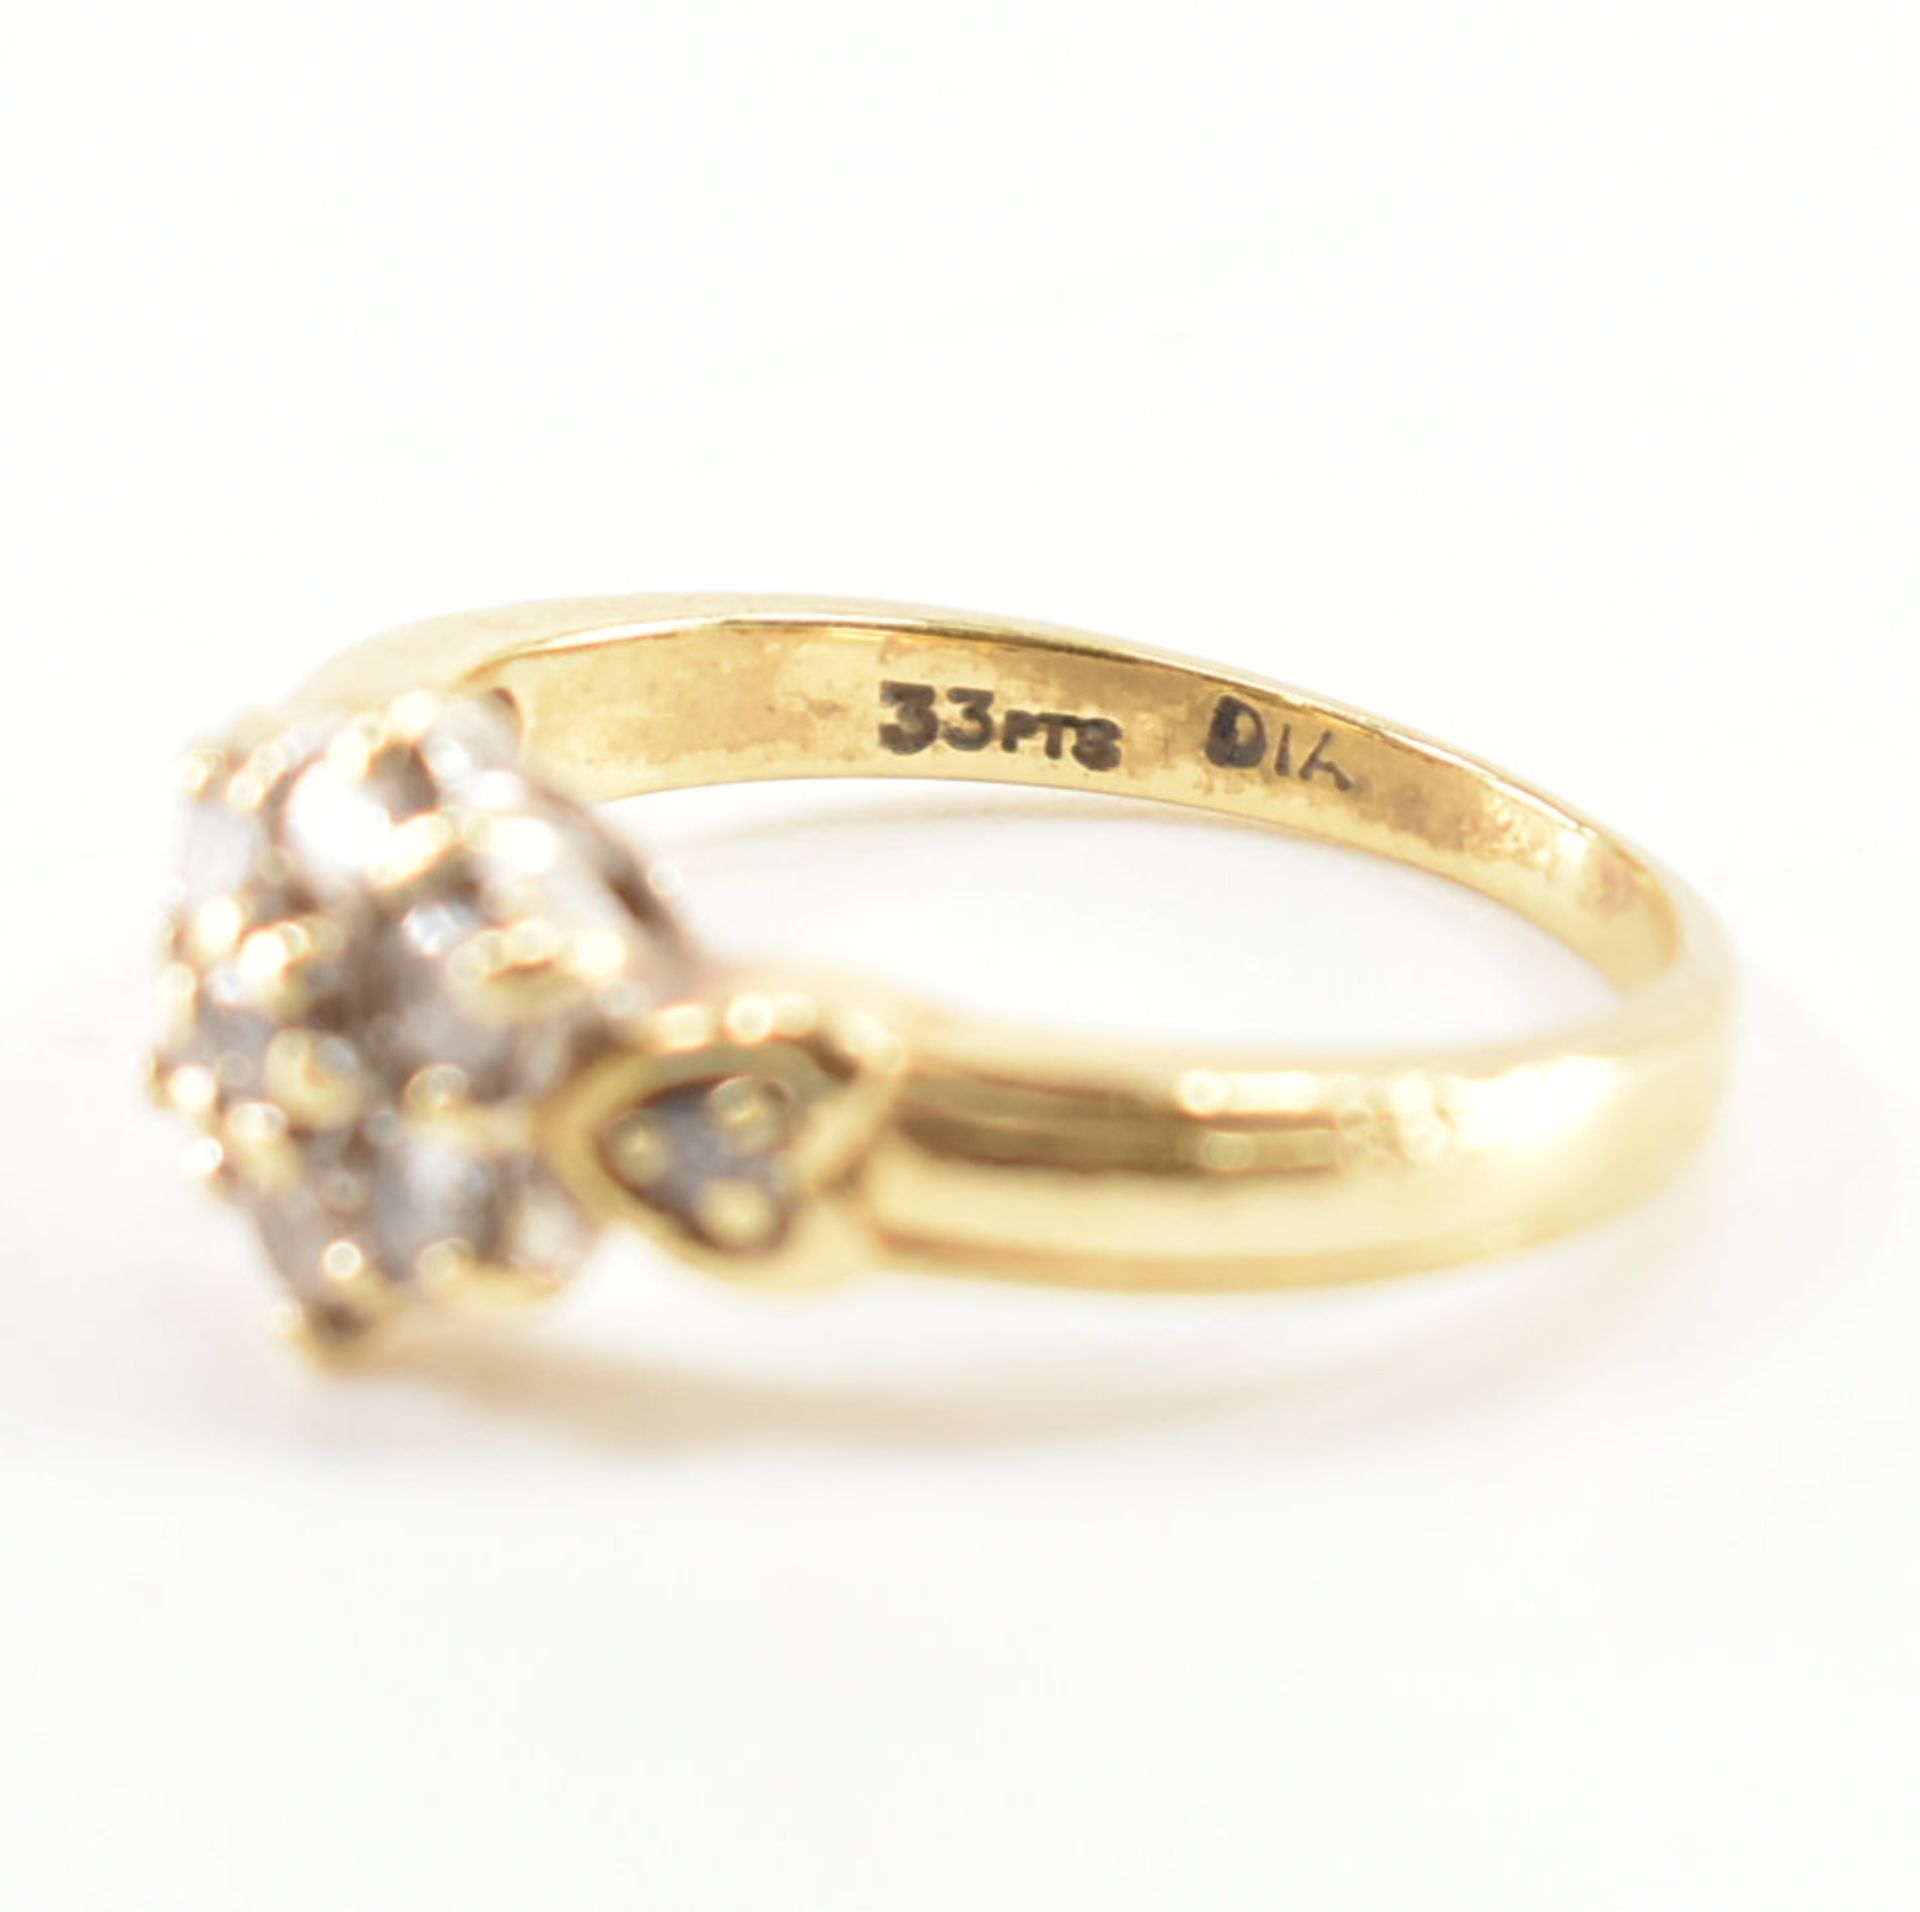 HALLMARKED 18CT GOLD & DIAMOND CLUSTER RING - Image 7 of 9